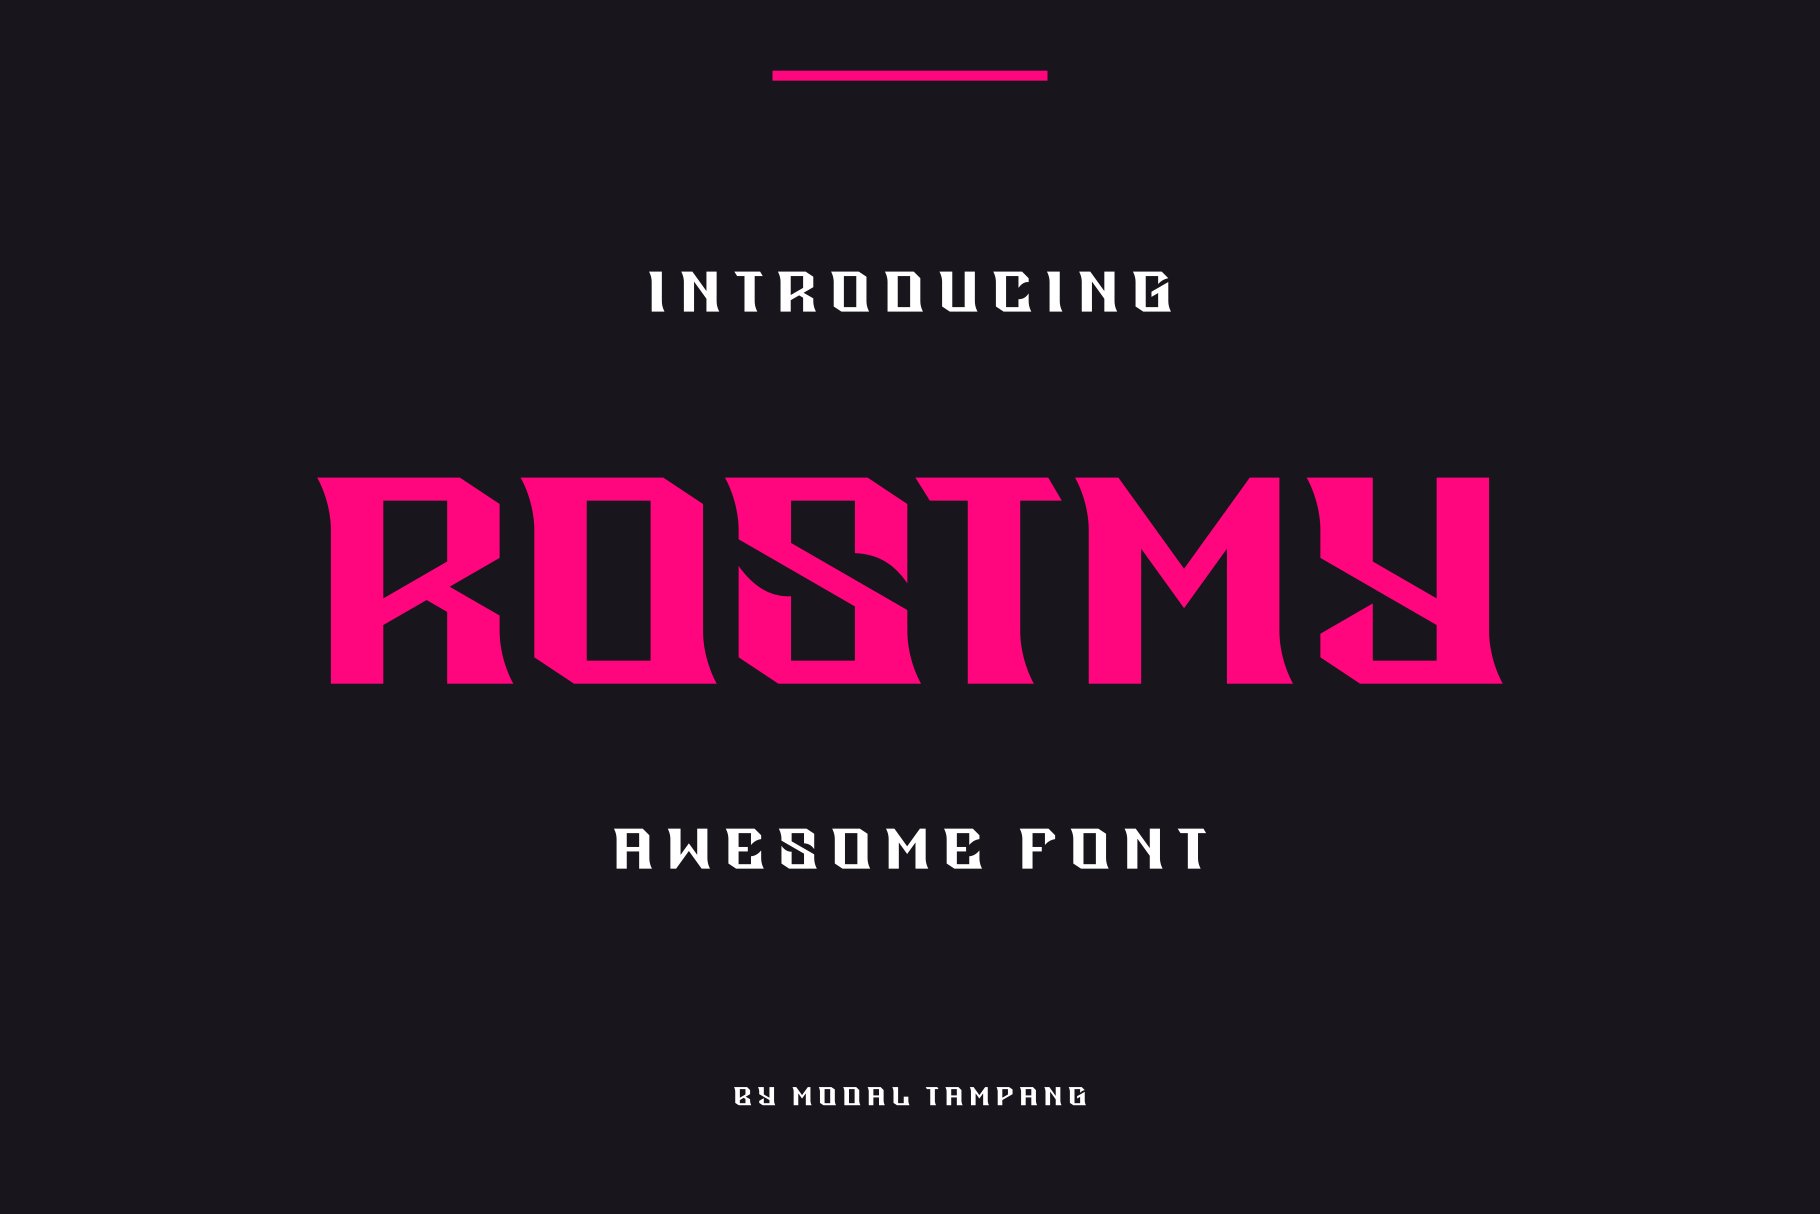 Rostmy Font cover image.